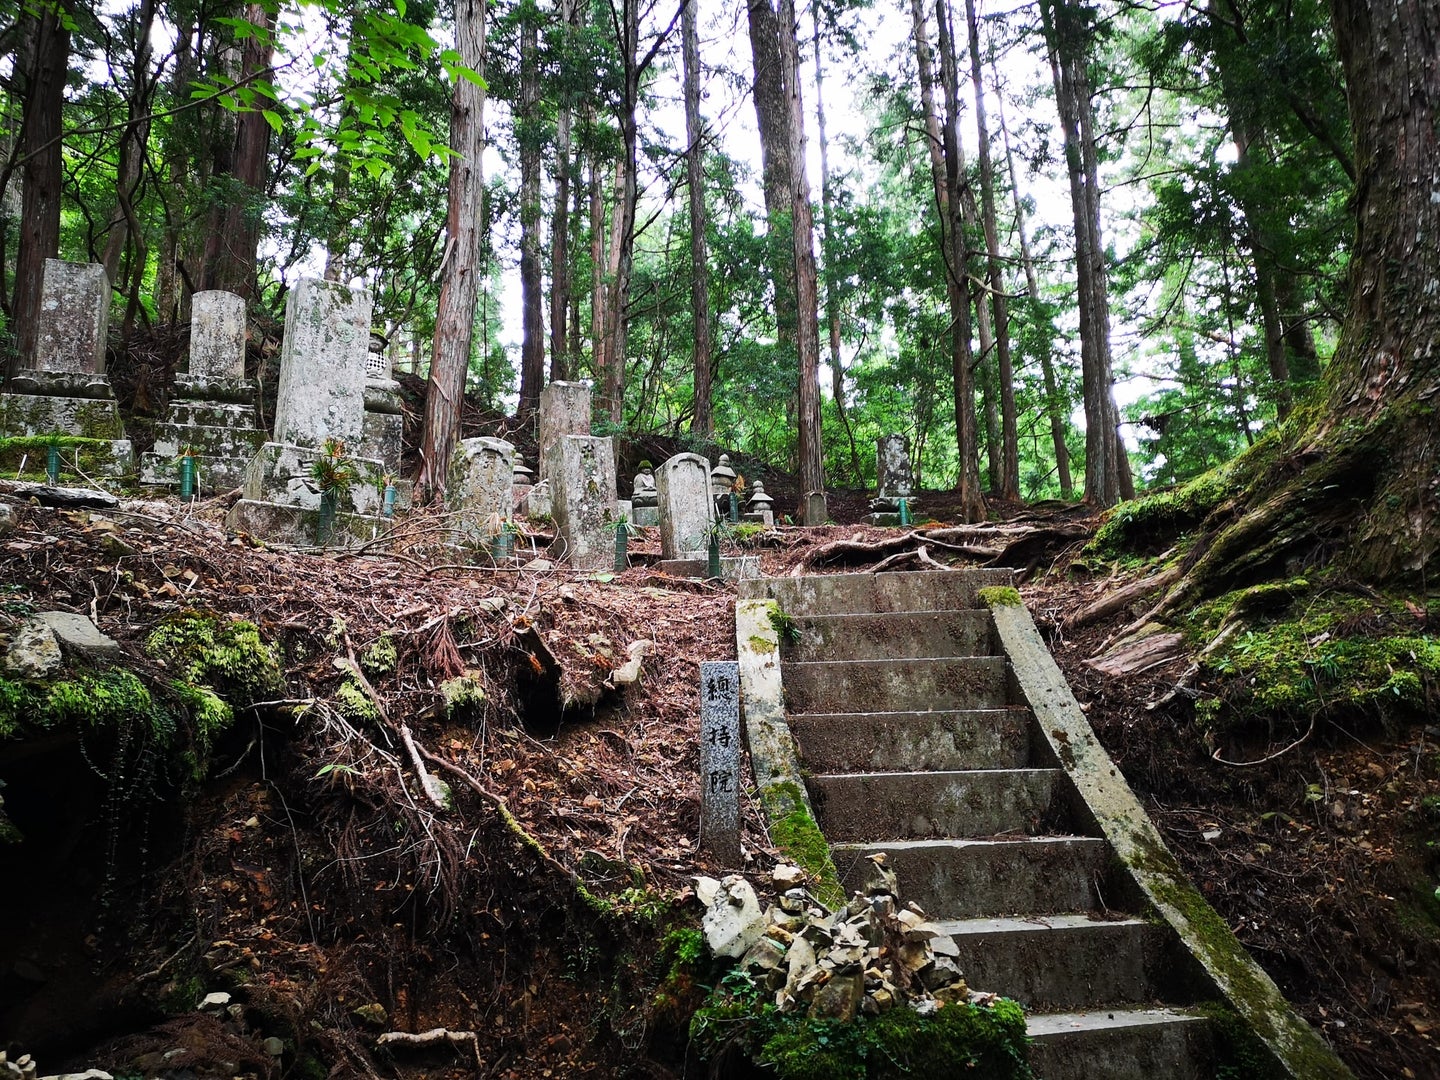 Tree-line tombstones with Japanese characters